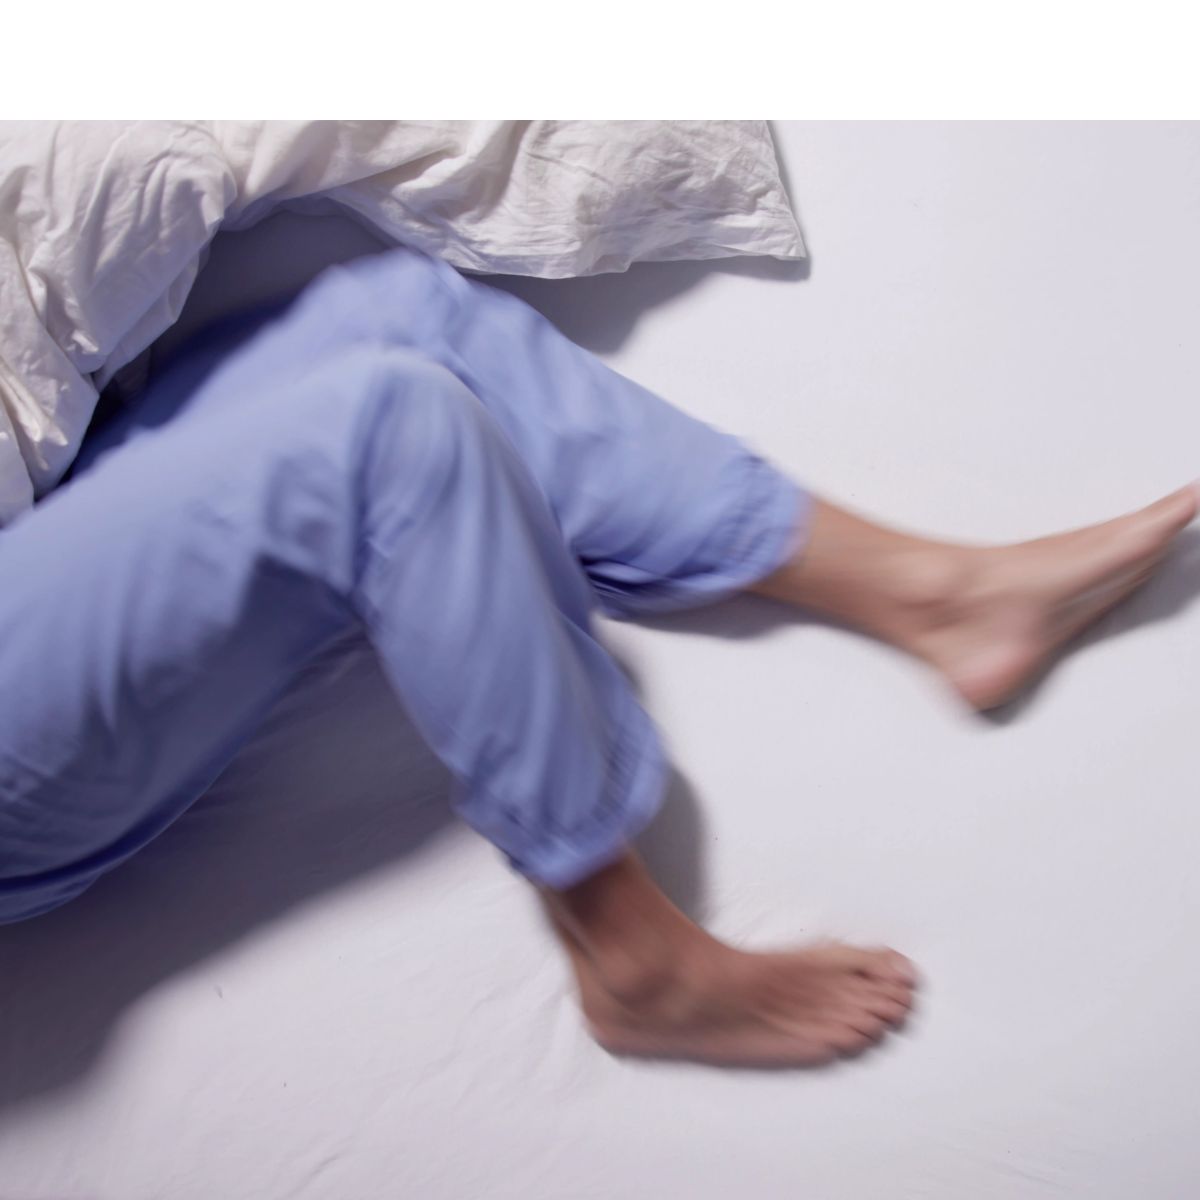 can cpap help restless leg syndrome